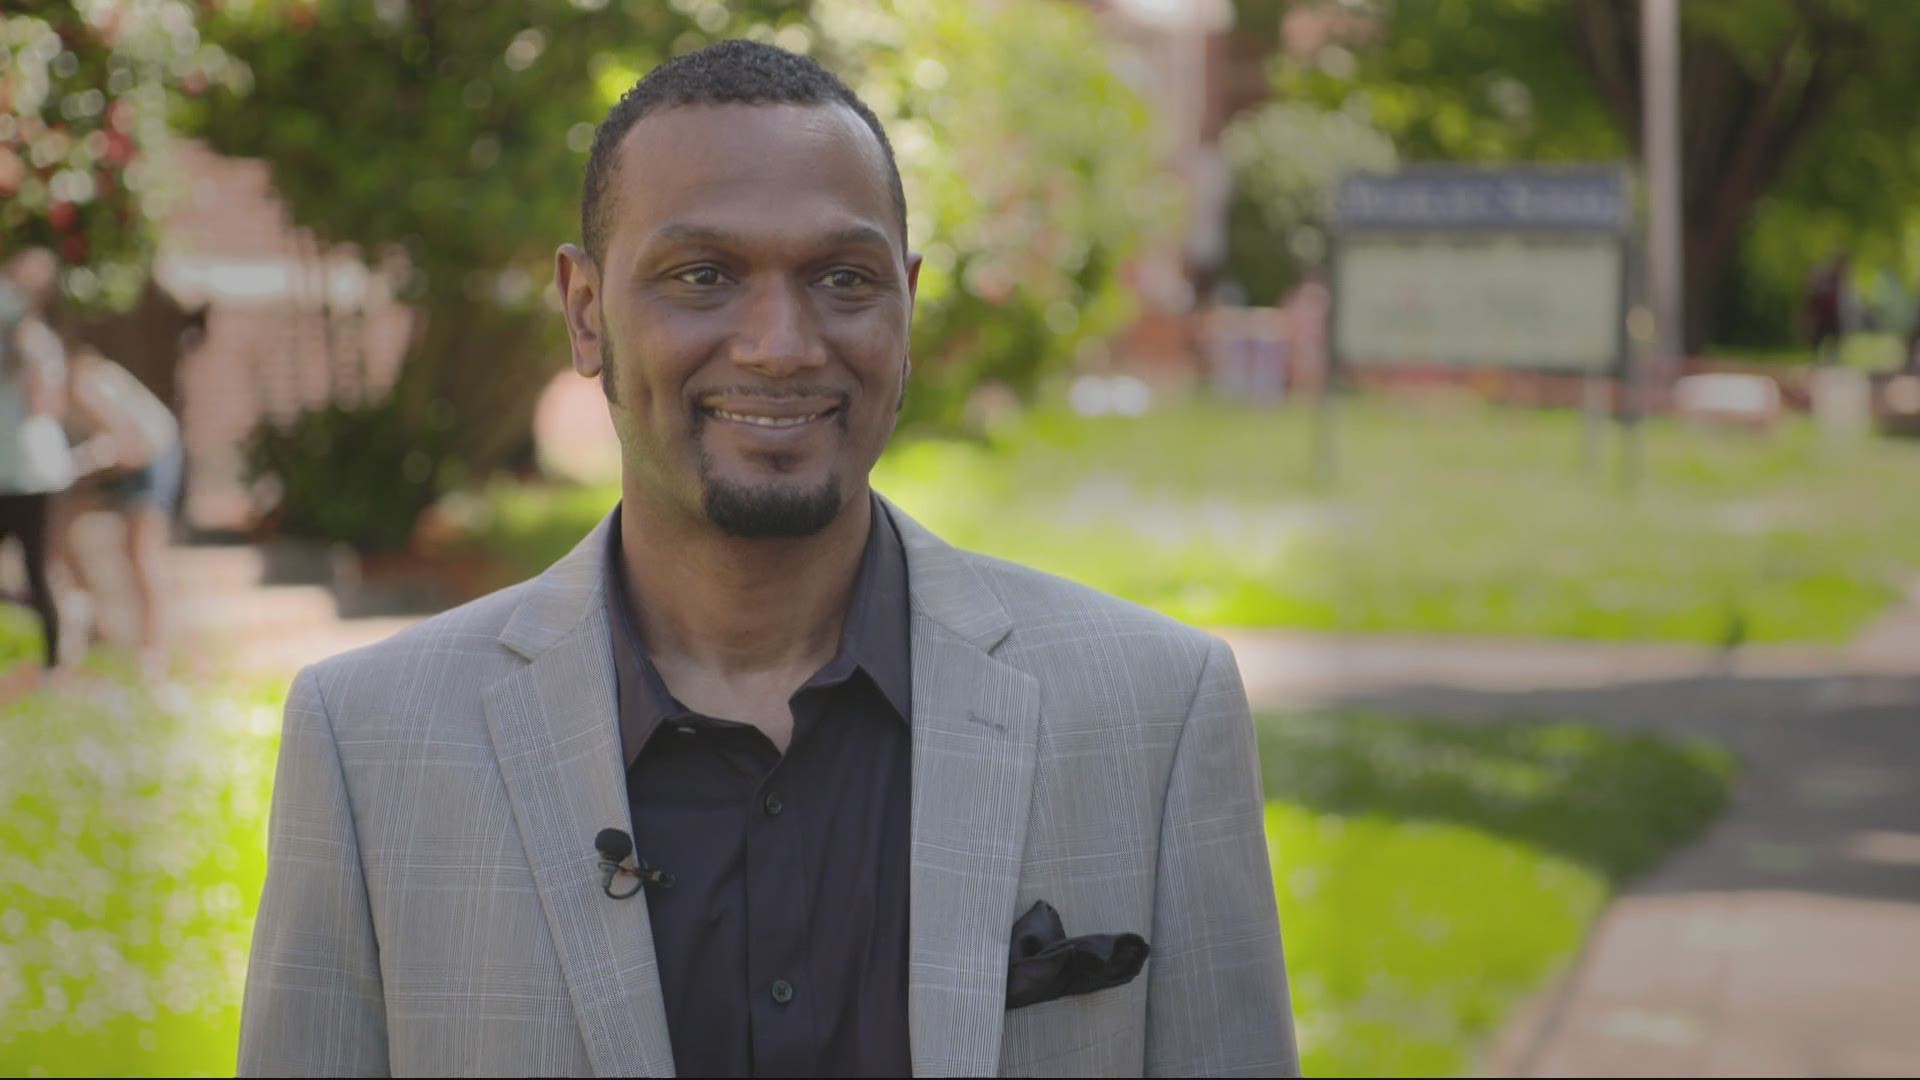 Lionel Clegg is one of the Educators of the Year honored by OnPoint Credit Union. Cristin Severance shares how he connects with kids in amazing ways.